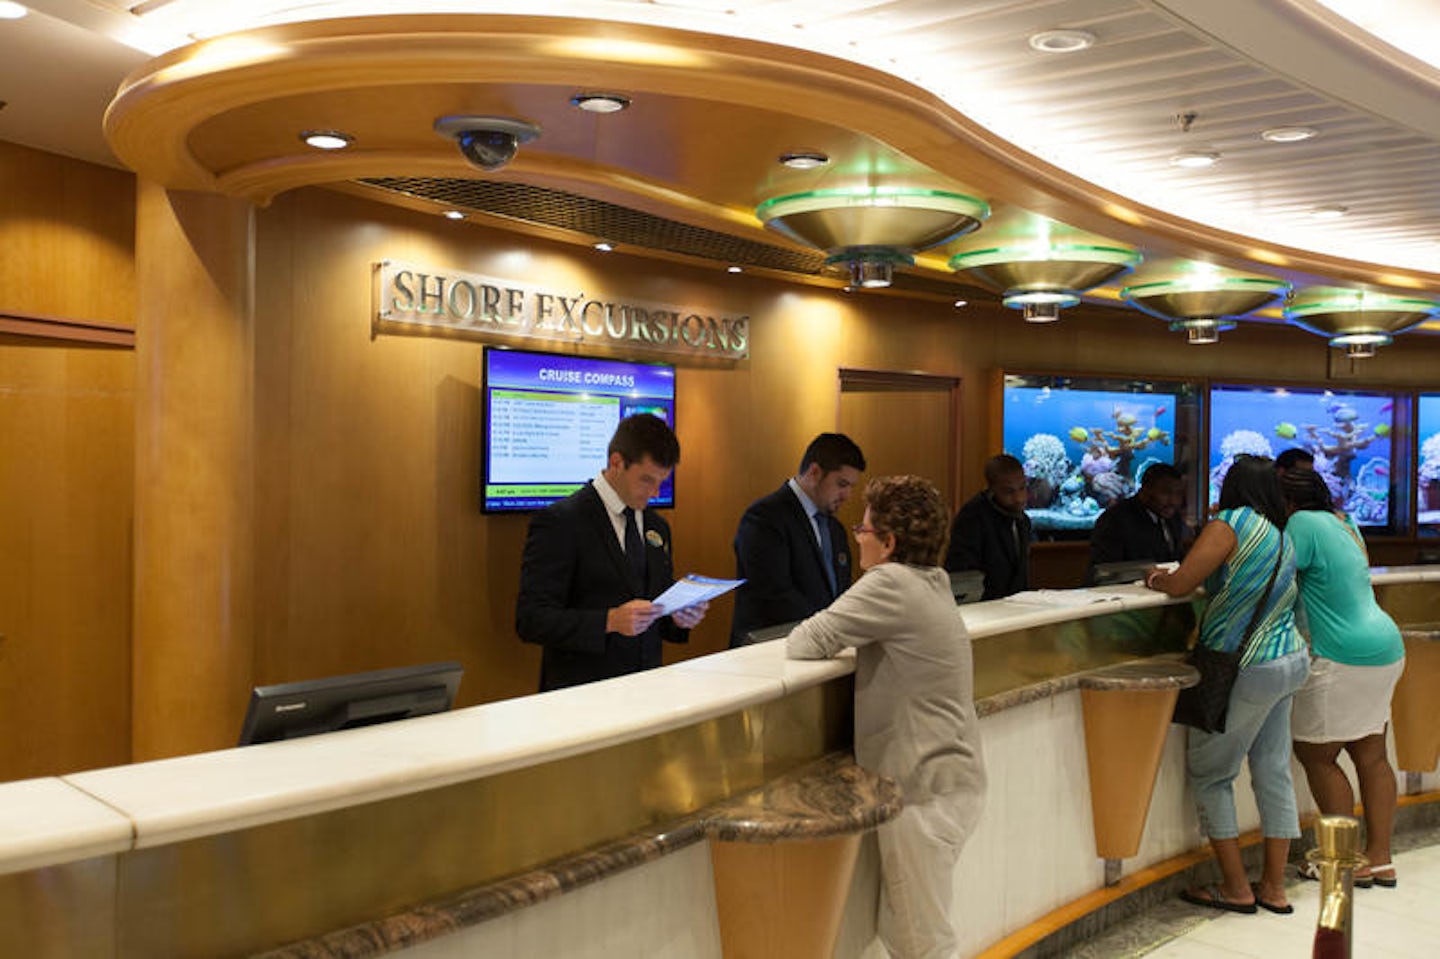 Shore Excursions Desk on Independence of the Seas